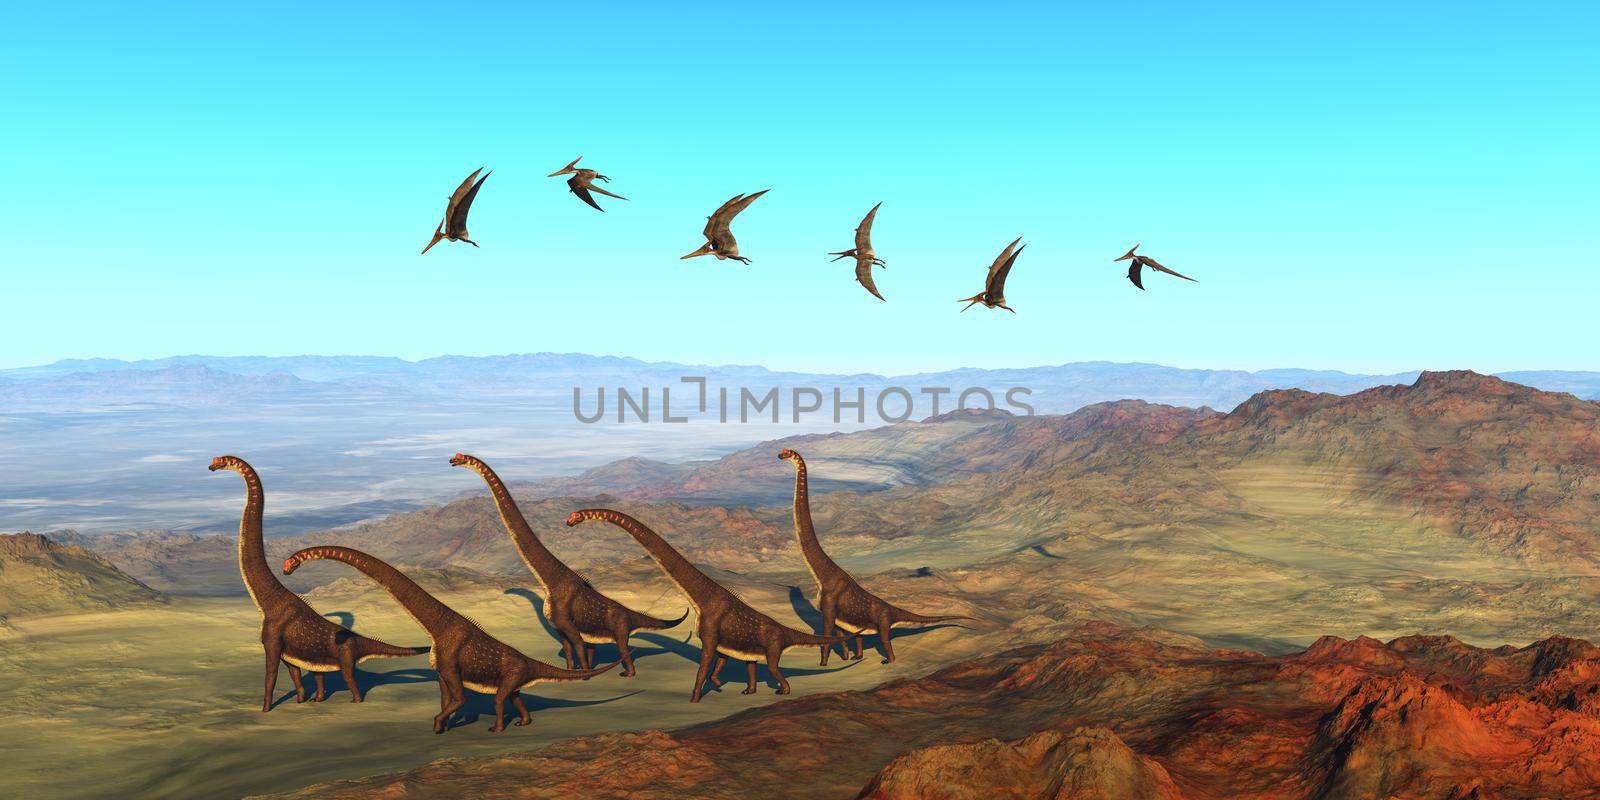 A herd of Giraffatitan dinosaurs walk on their yearly migration over an African extinct volcano as a flock of Pteranodons fly over them.